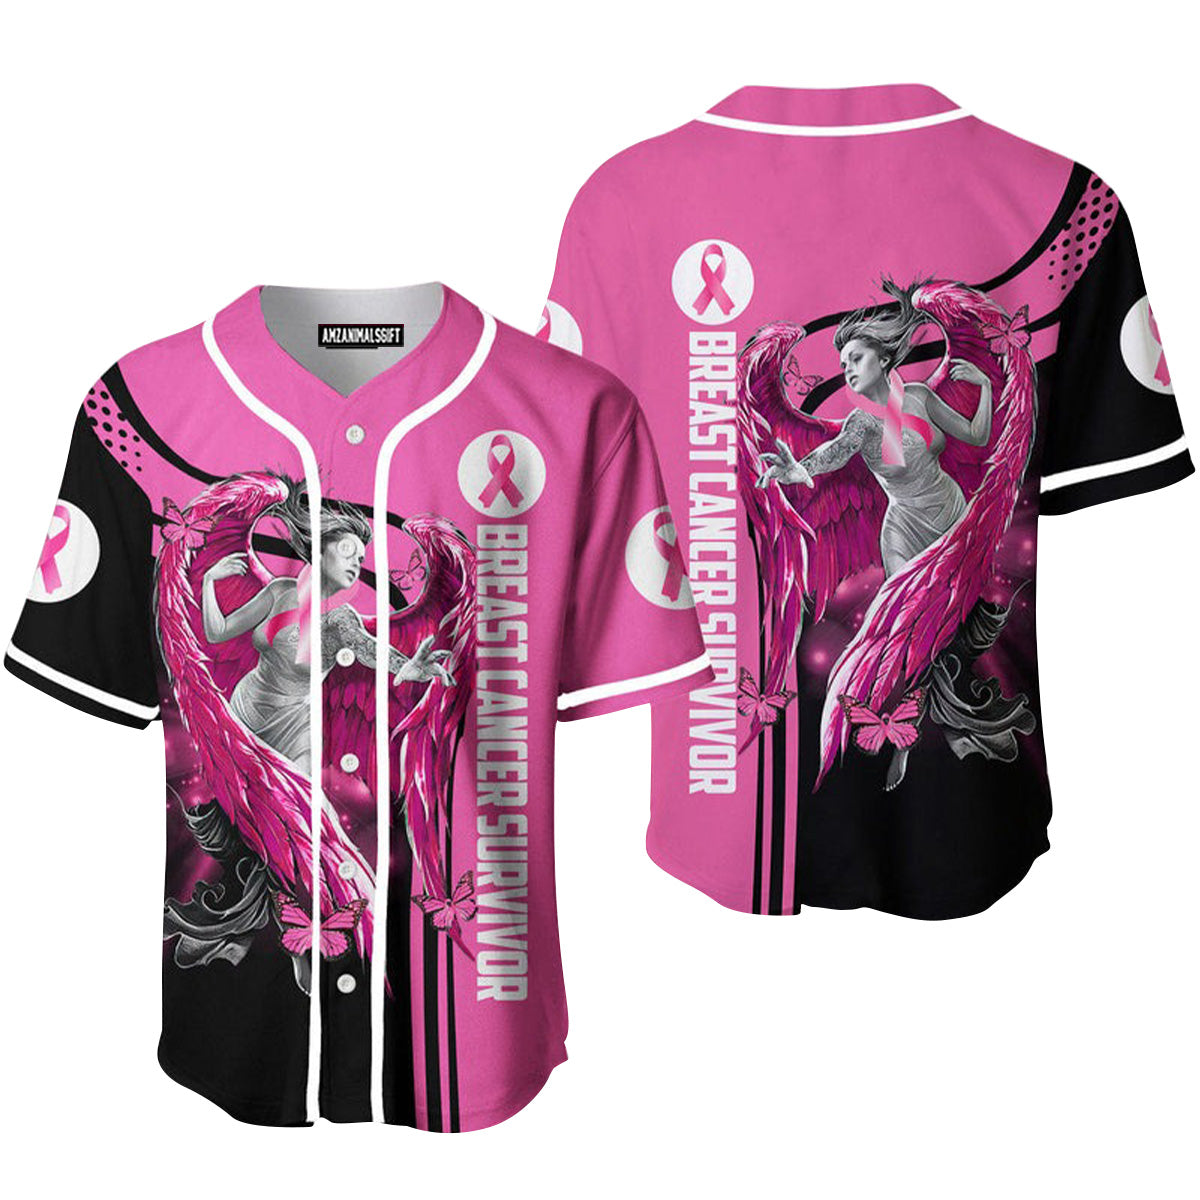 Breast Cancer Survivor Angel Fighters Baseball Jersey, Perfect Outfit For Men And Women On Breast Cancer Survivors Baseball Team Baseball Fans